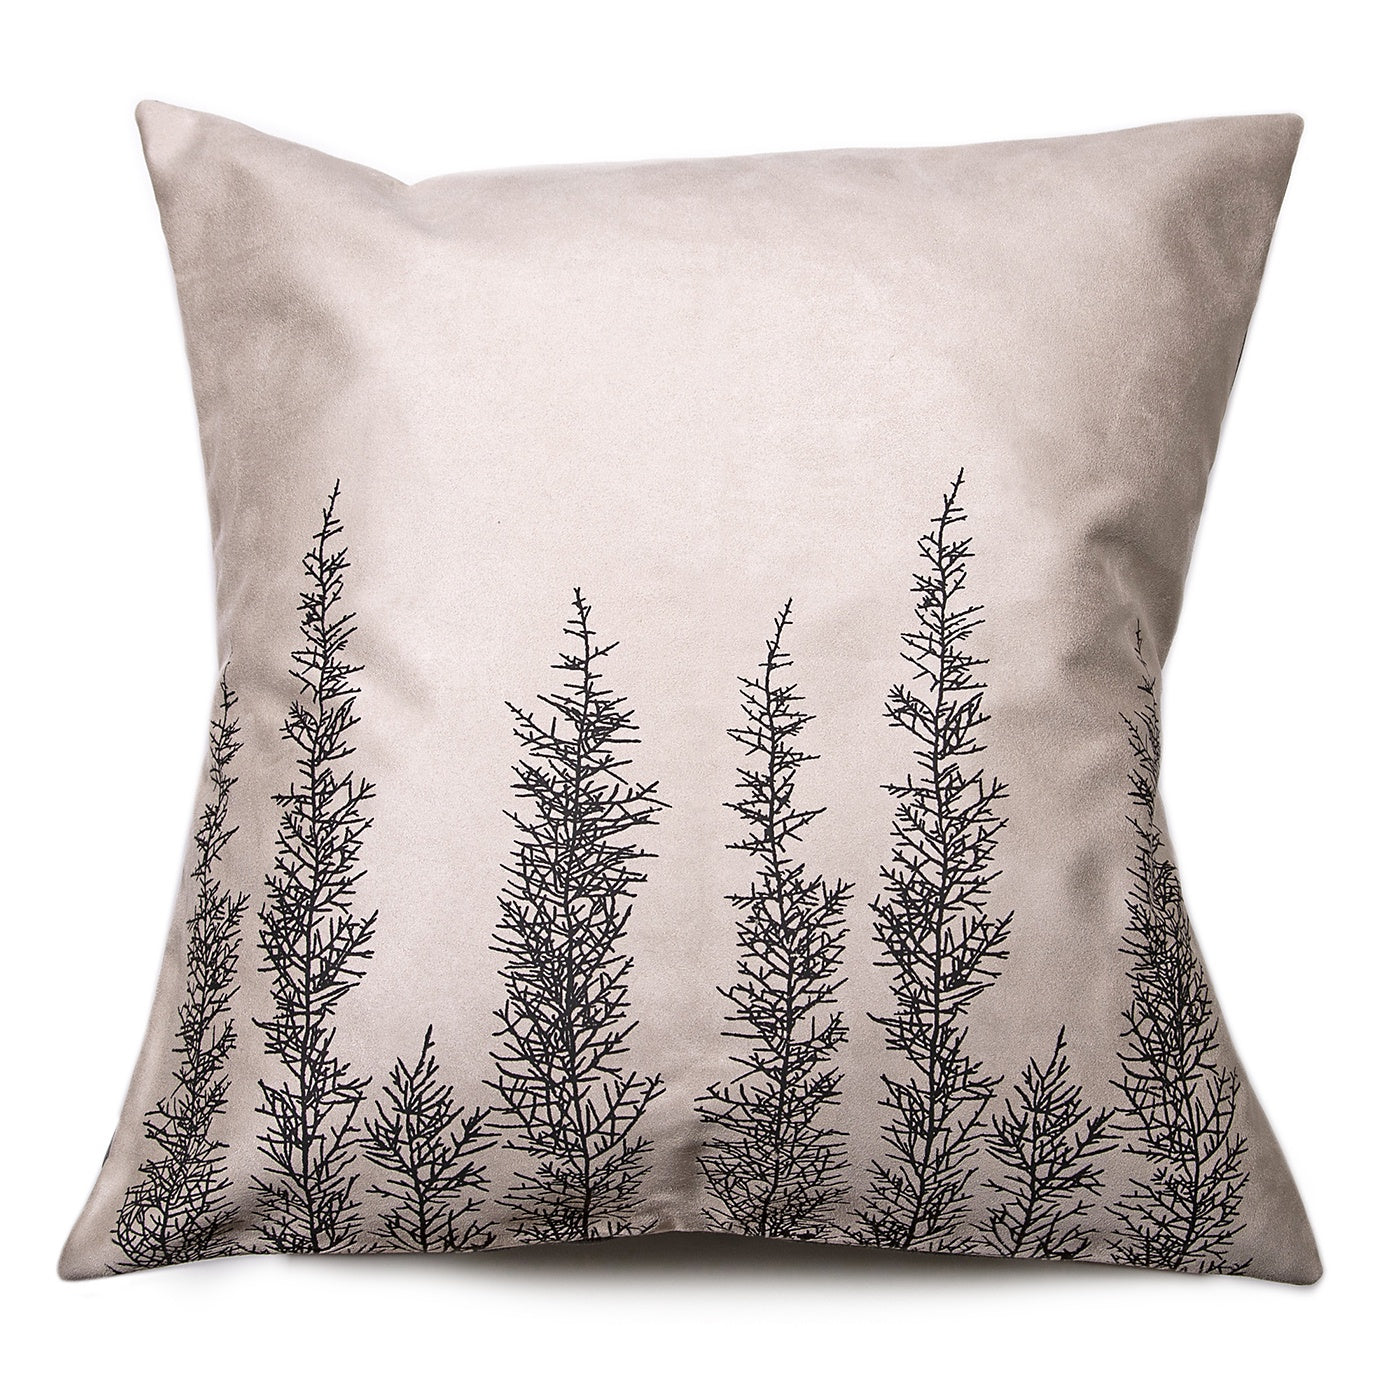 Stalley Textile Co. - Cushion Cover - Huon Pine - Black on Cream